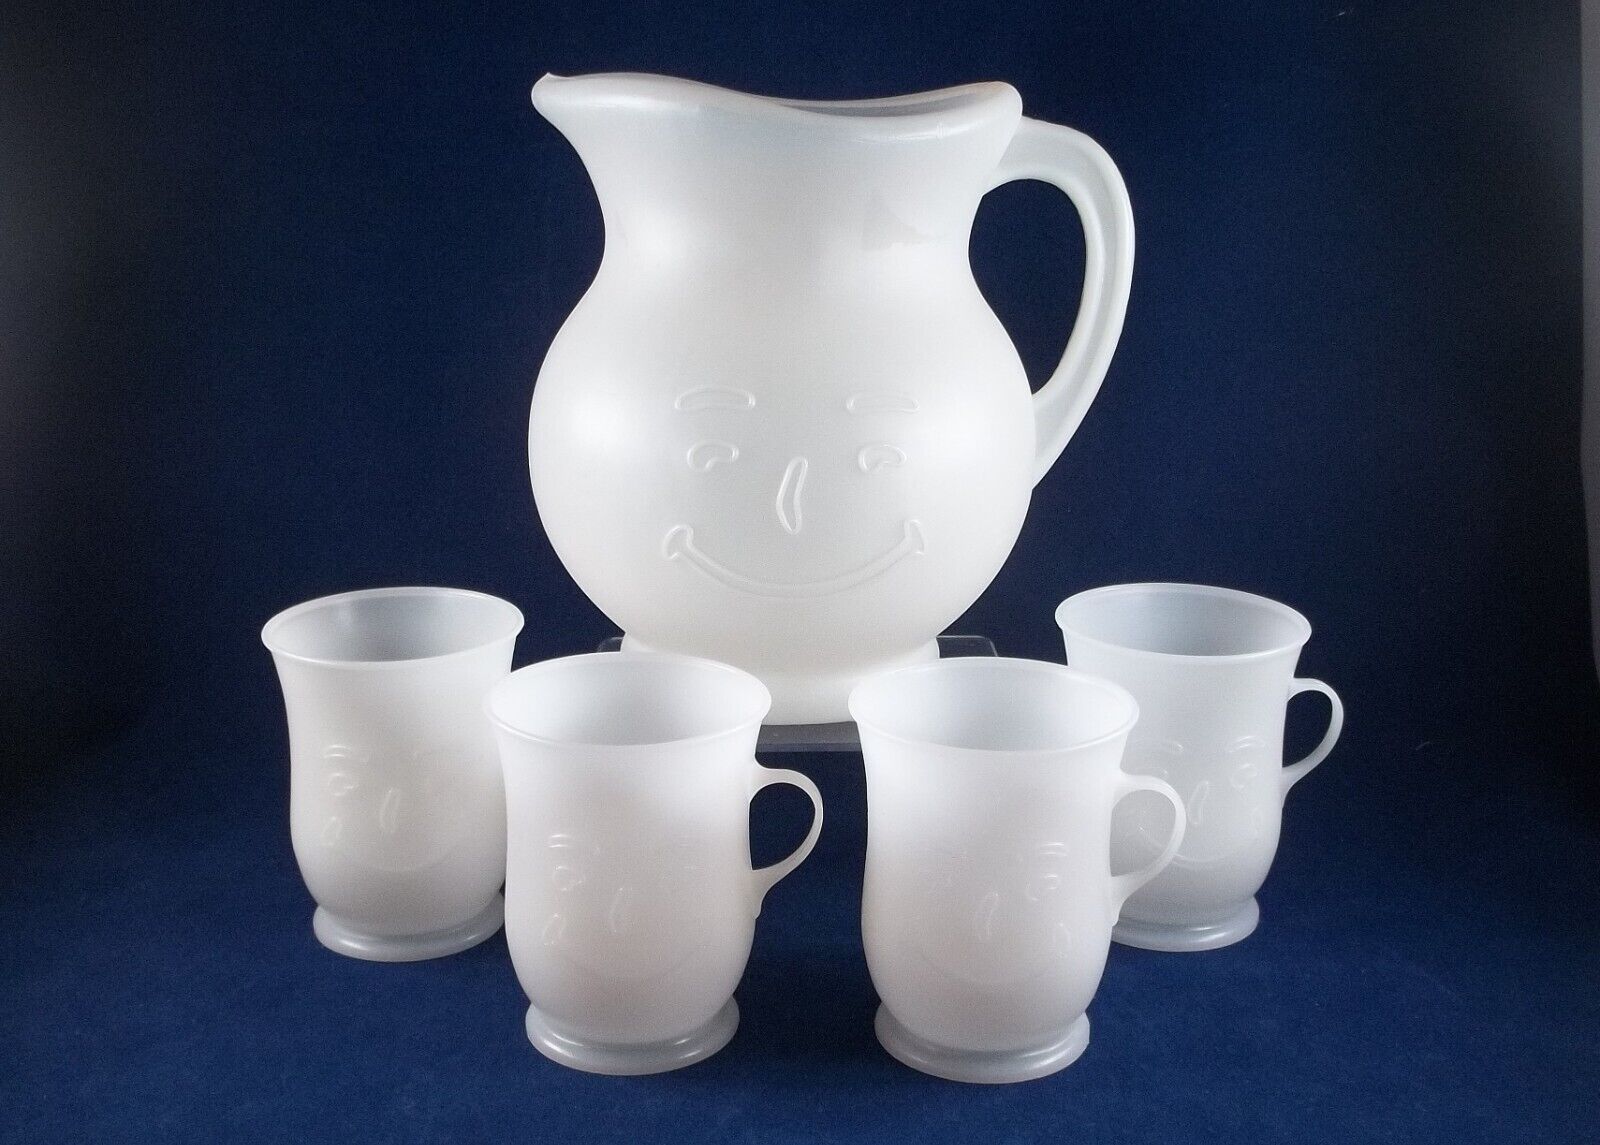 Vintage 1980's Kool Aid Opaque White Plastic Pitcher & 4 Matching Cups